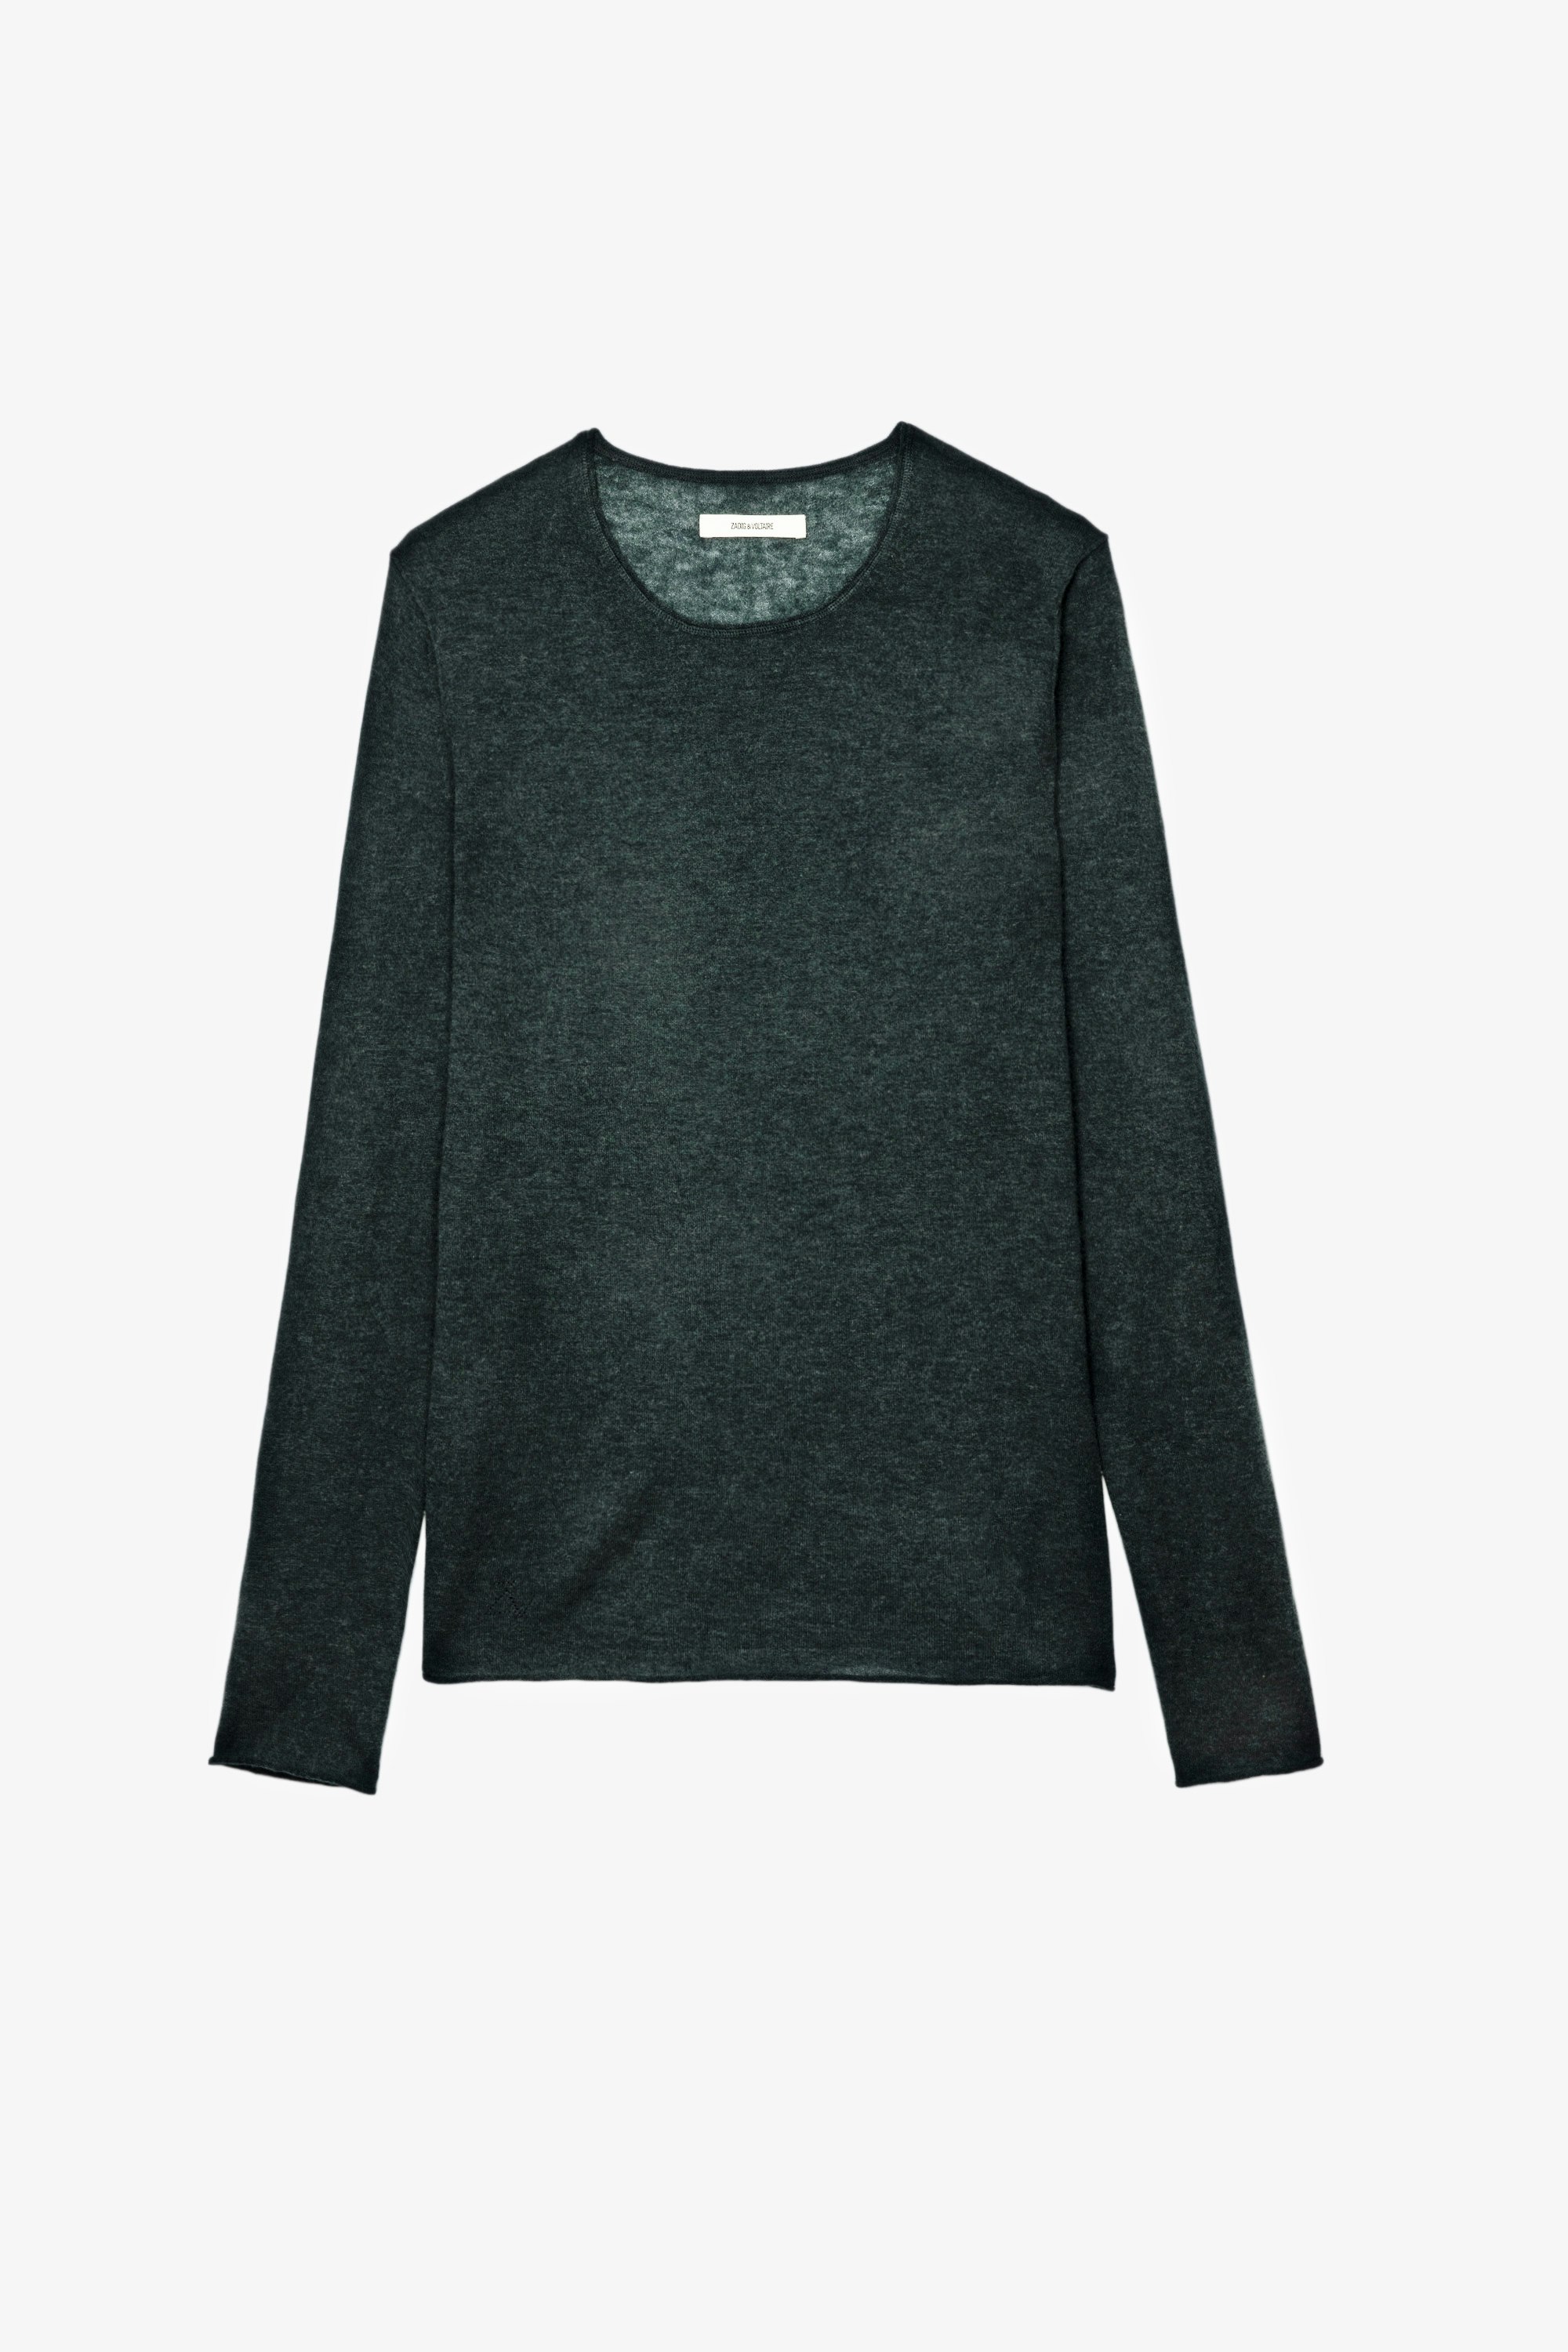 Teiss Cashmere Pullover Men's green cashmere jumper